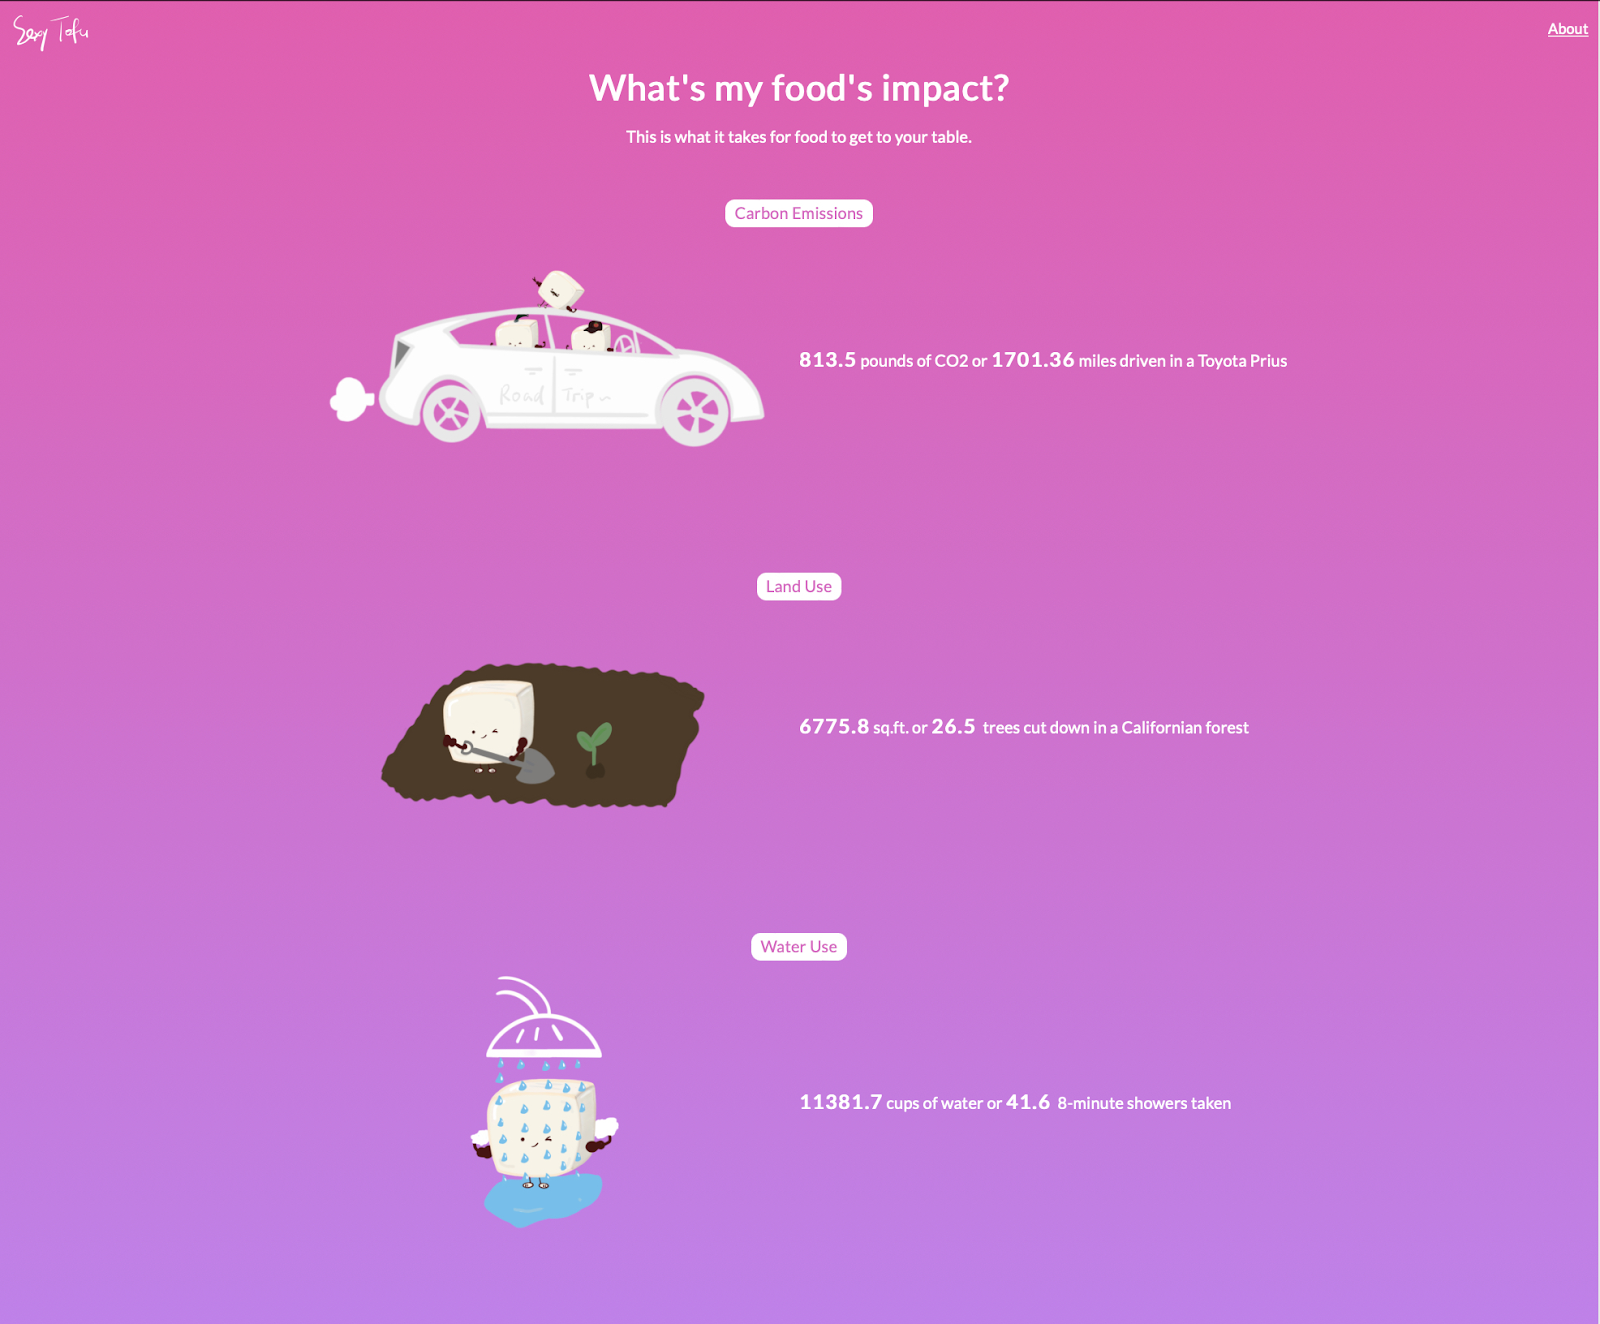 A screenshot of the website, which has diagrams indicating your carbon footprint if you consumed only four pounds of beef and four pounds of tofu weekly, compared to carbon emissions from driving a Toyota Prius (813.4 pounds of CO2, or 1701.36 miles driven), the number of trees that have to be cut down (26.5) and water usage from showering (11381.7 cups)